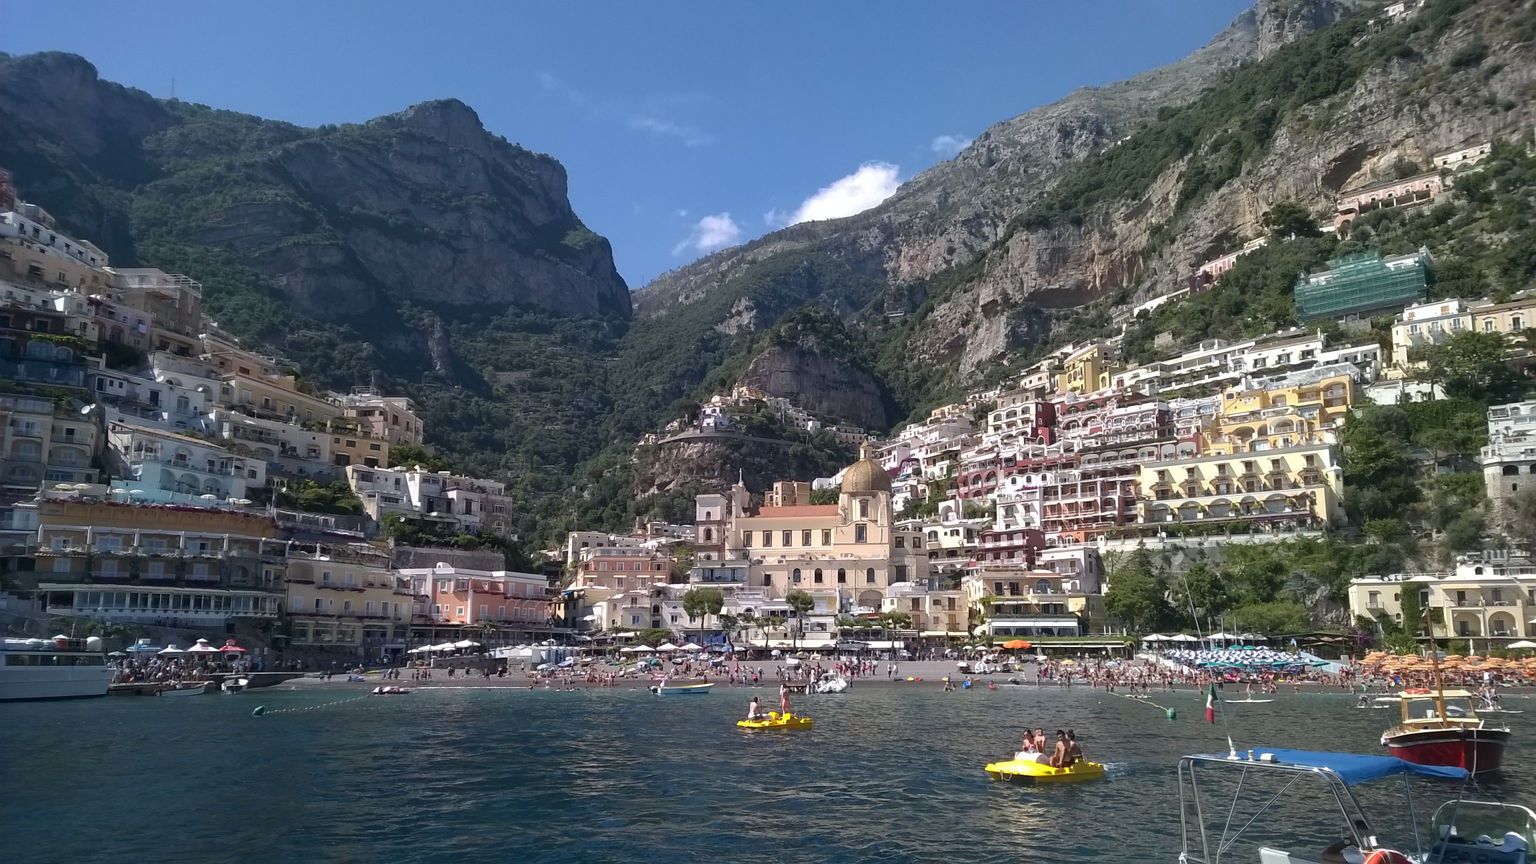 The view docking at Positano